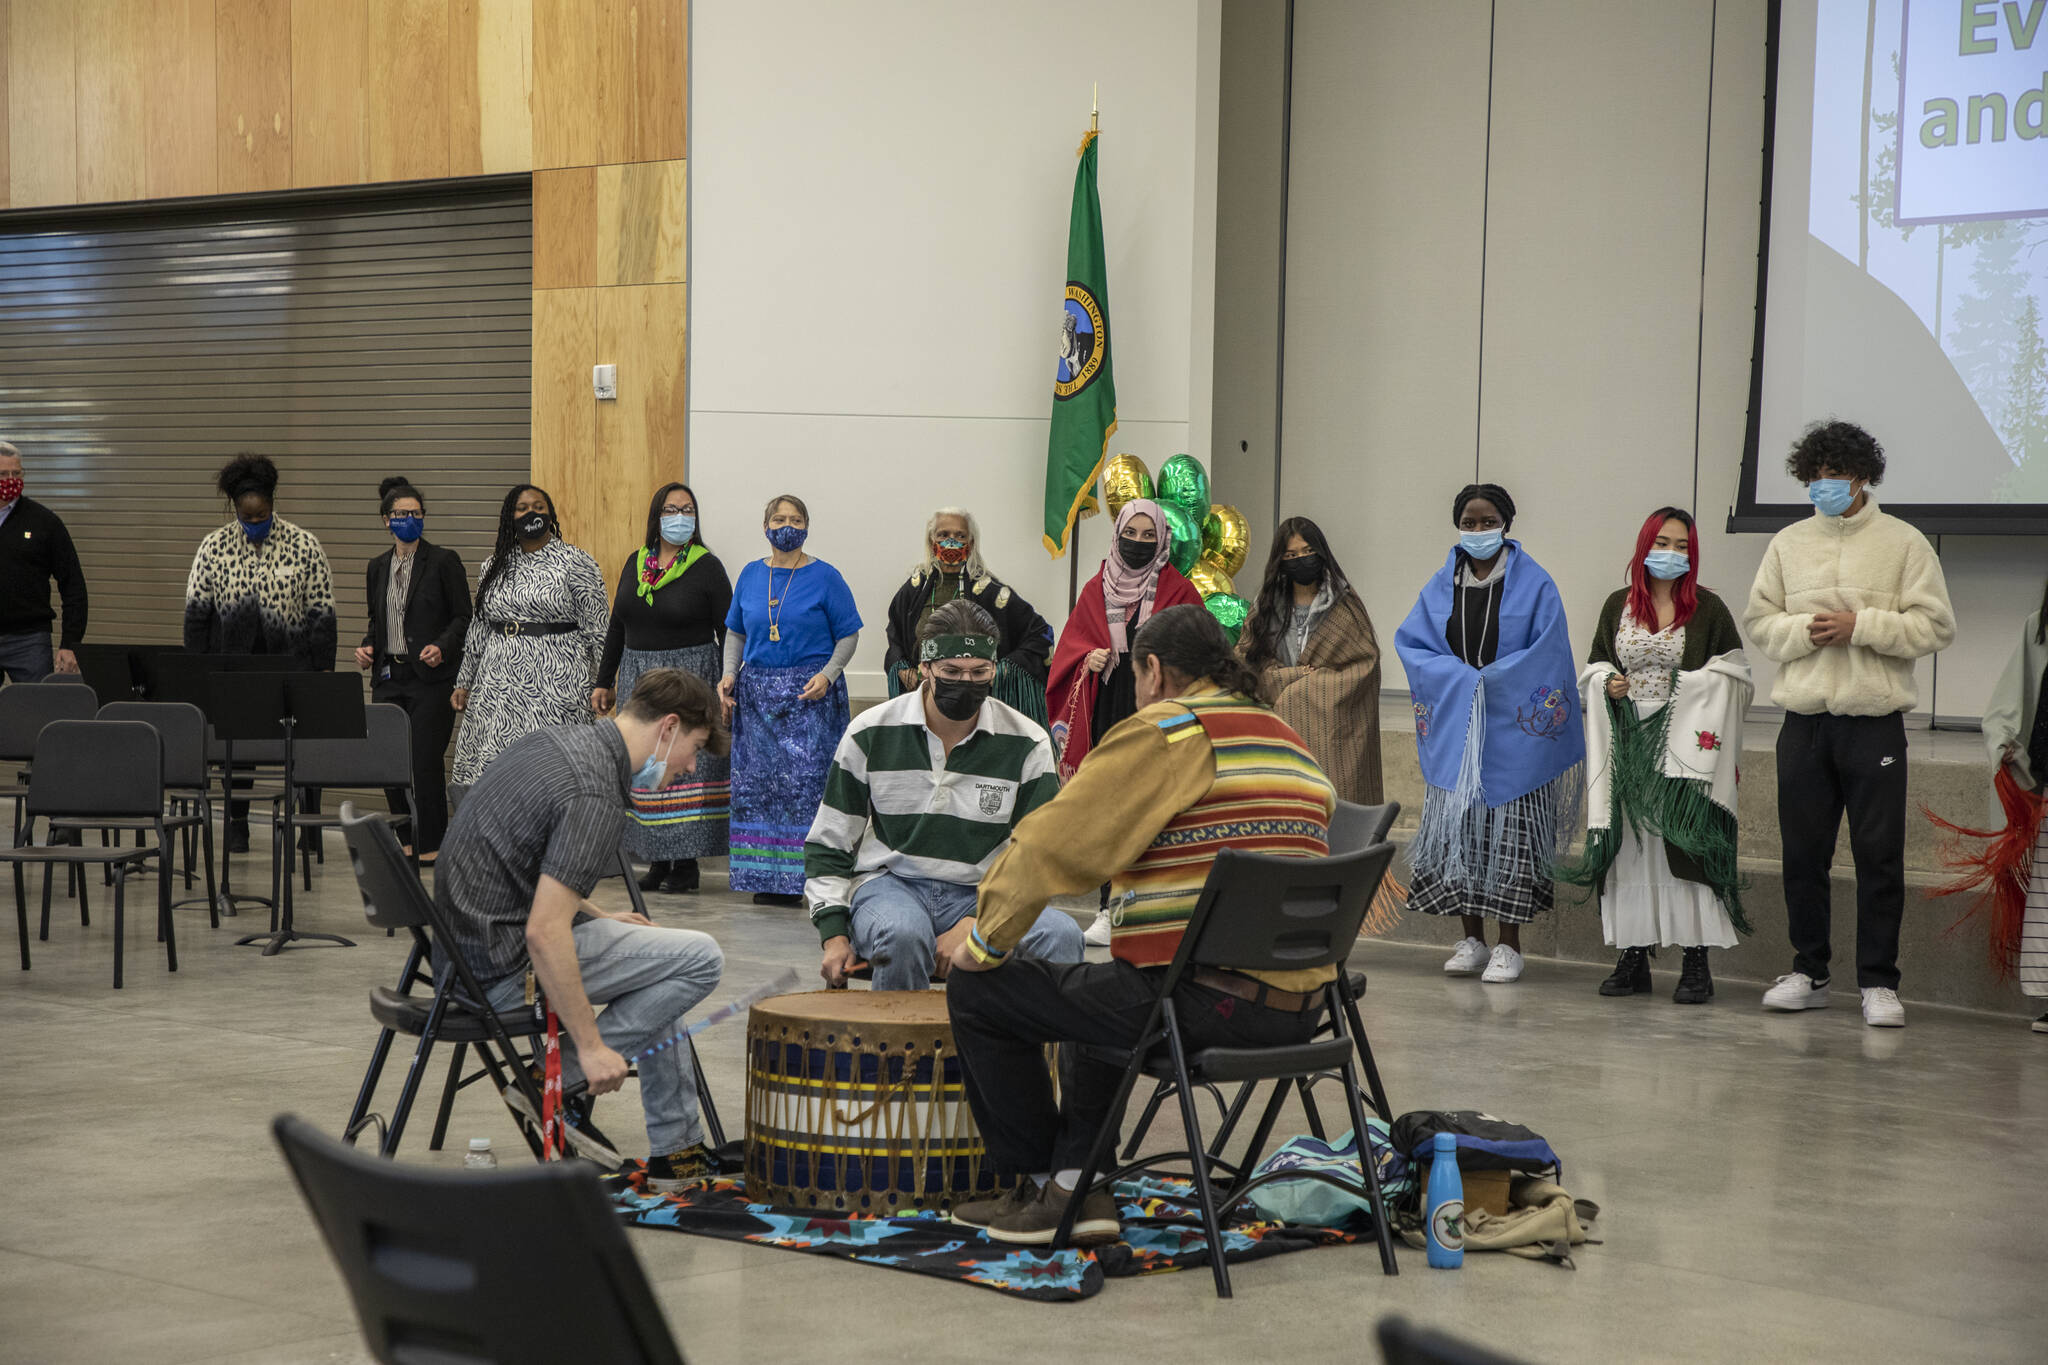 People at the event participated in a round dance while listening to a drum circle led by Federal Way resident Raymond Kingfisher. COURTESY PHOTO, Federal Way Public Schools